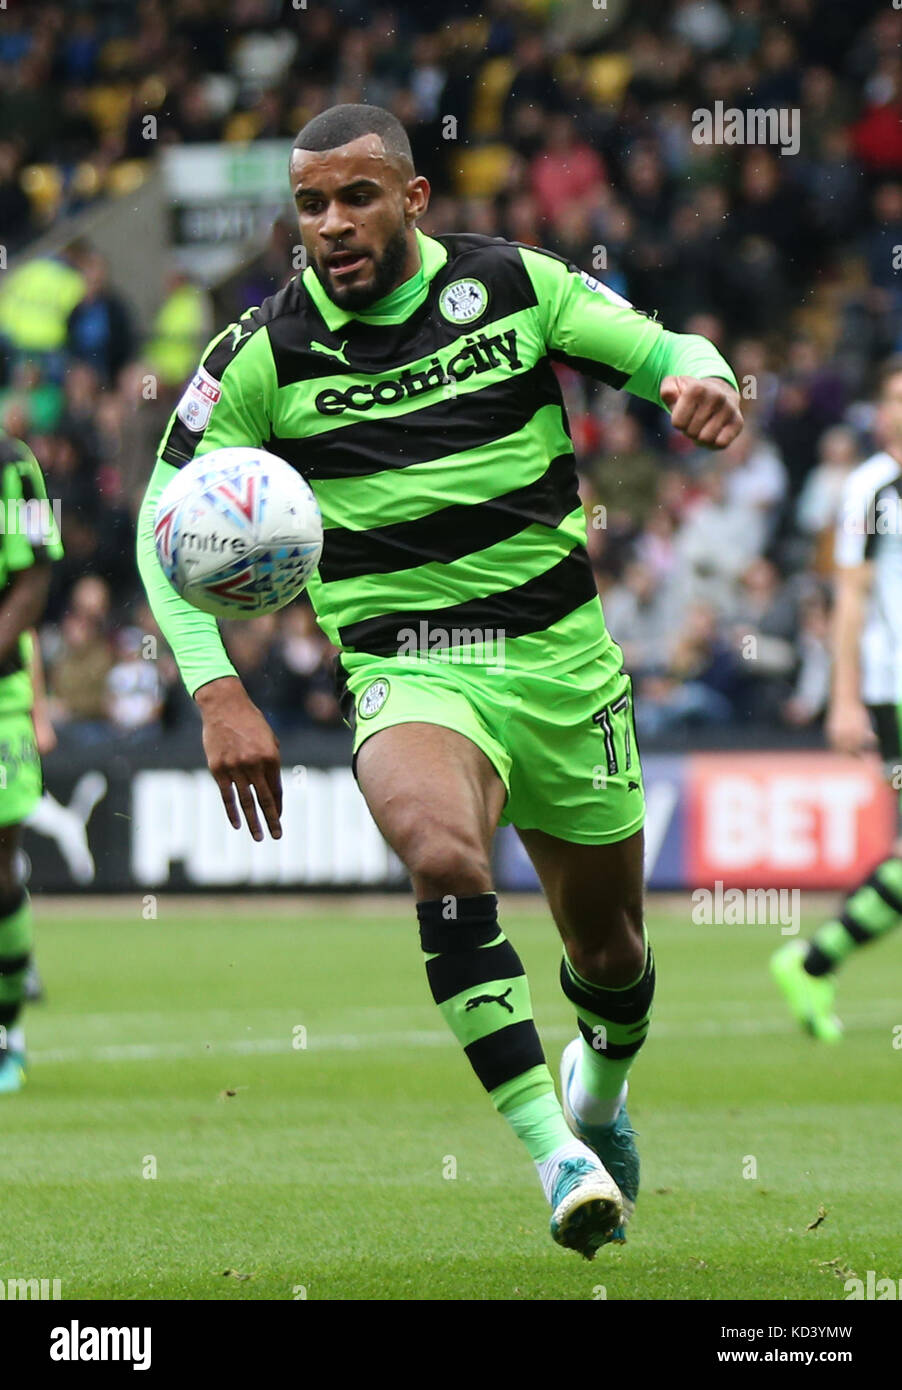 Forest Green Rovers' Daniel Wishart during the match at Meadow Lane, Nottingham. Stock Photo